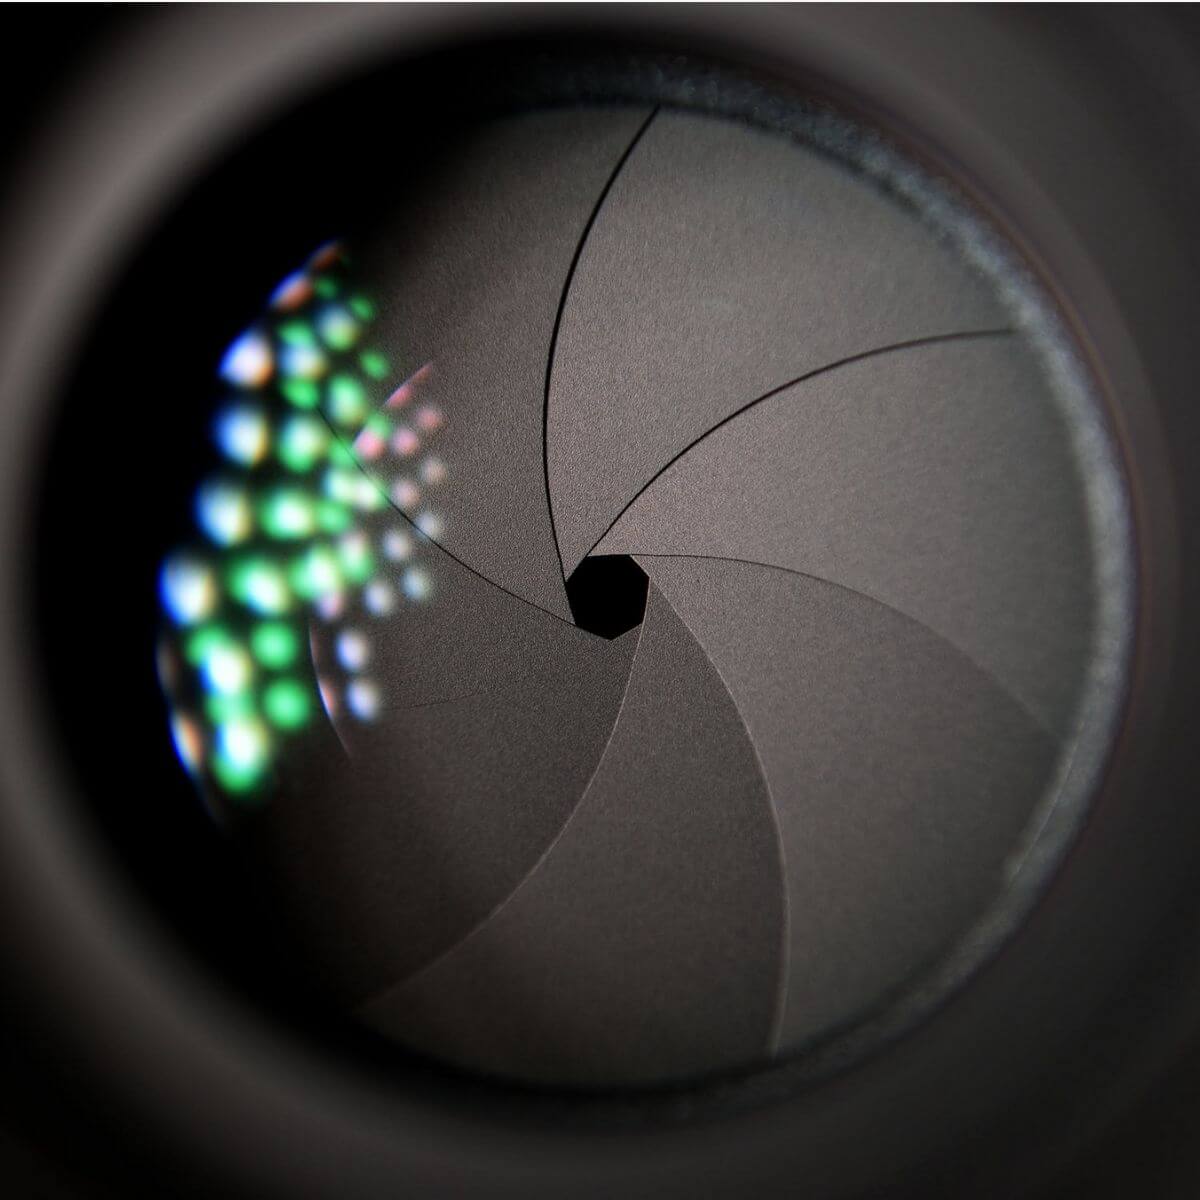 Close-up of a camera lens showing the aperture.